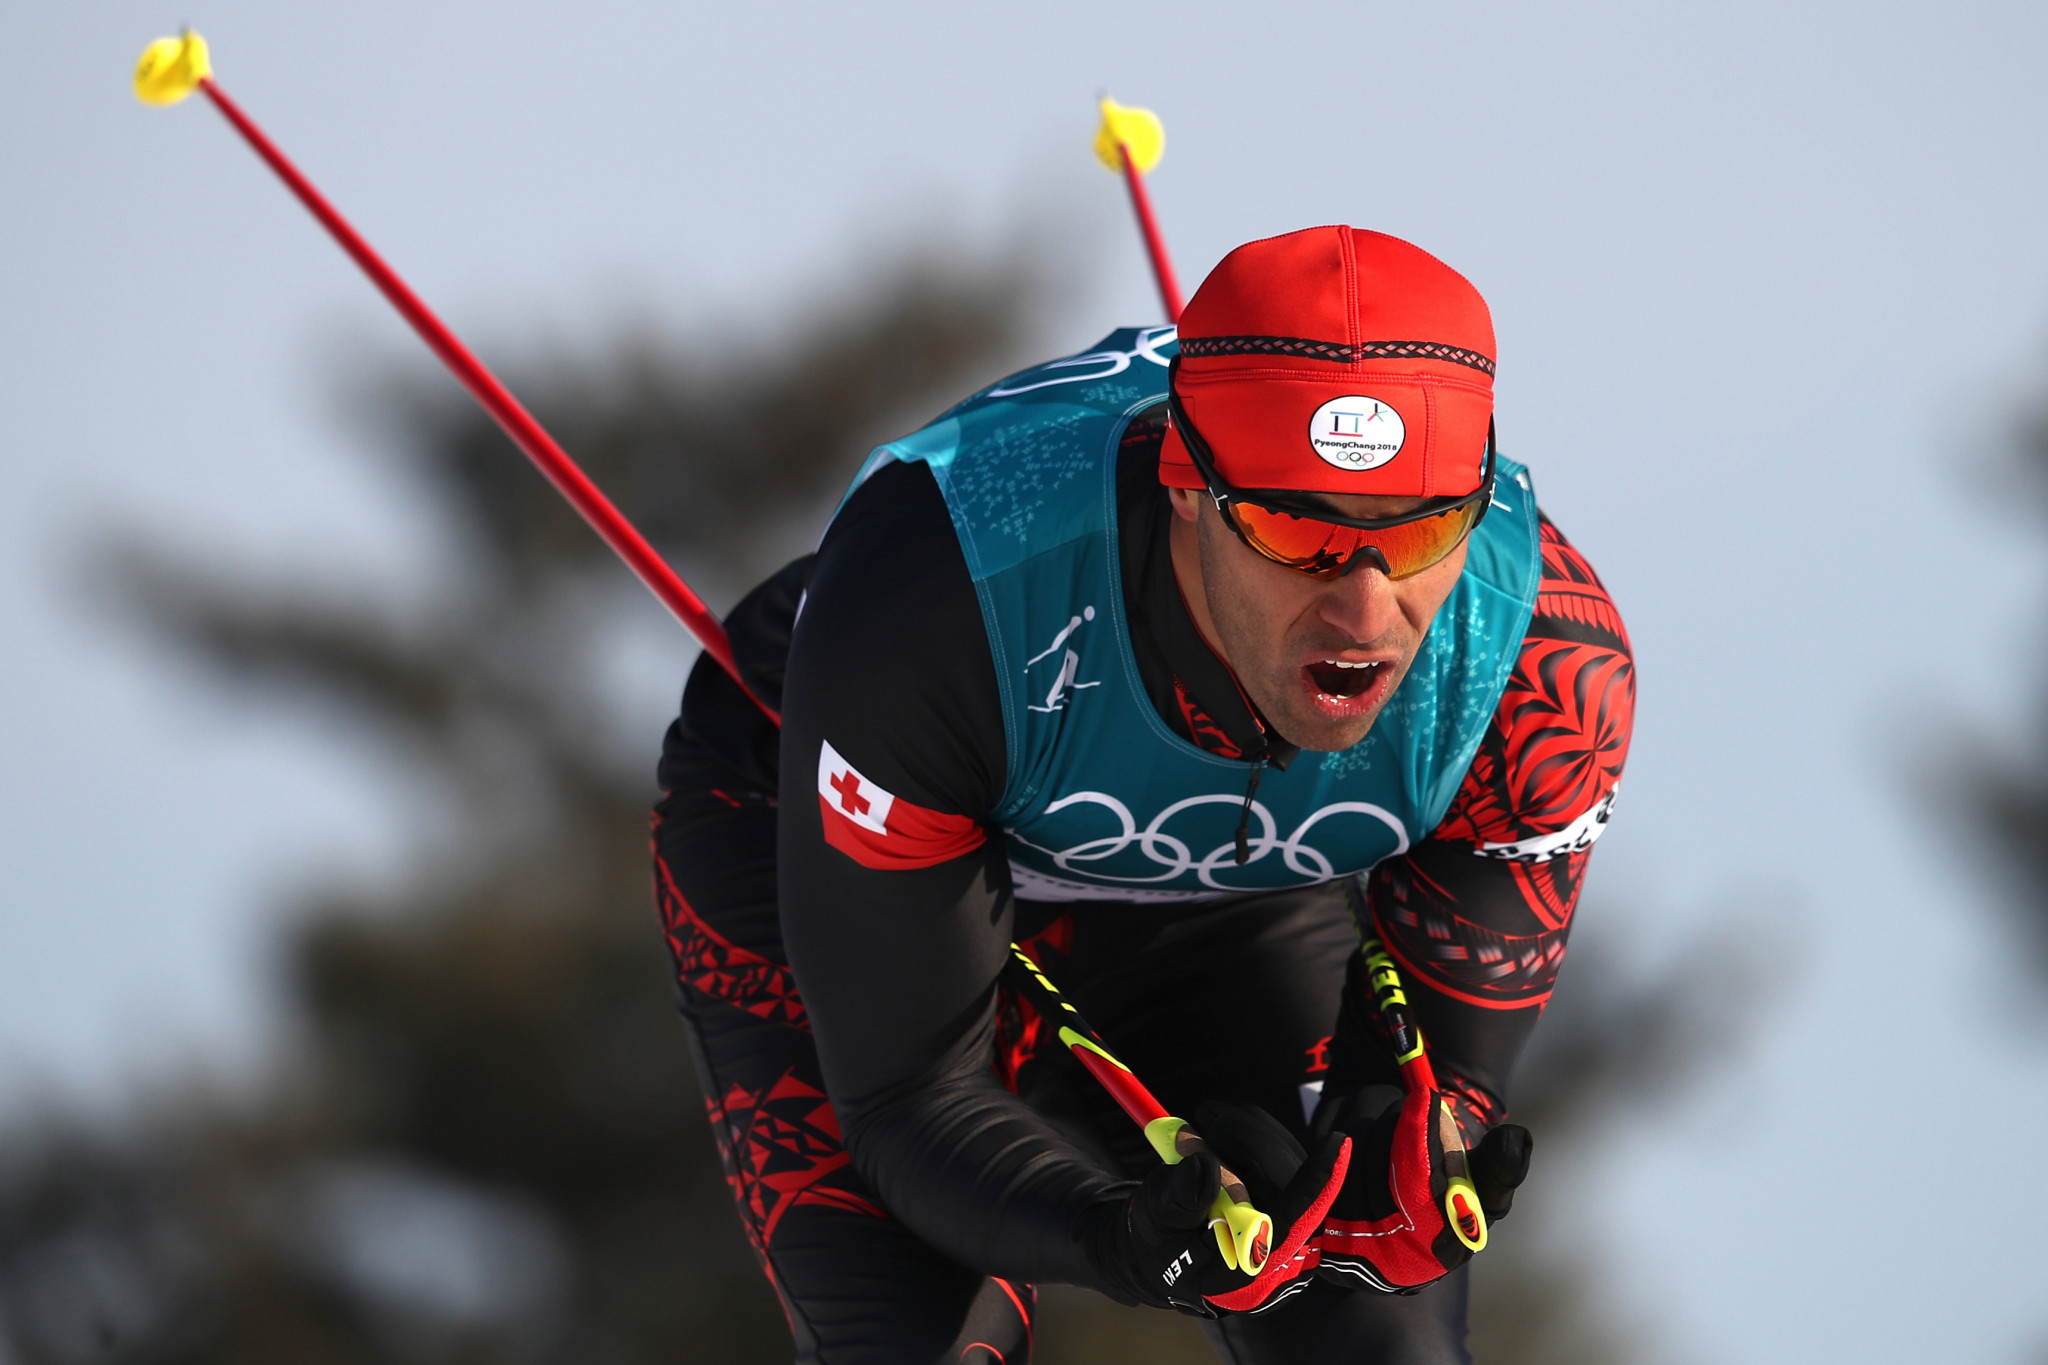 Pita Taufatofua also competed in cross-country skiing at Pyeongchang 2018 ©Getty Images